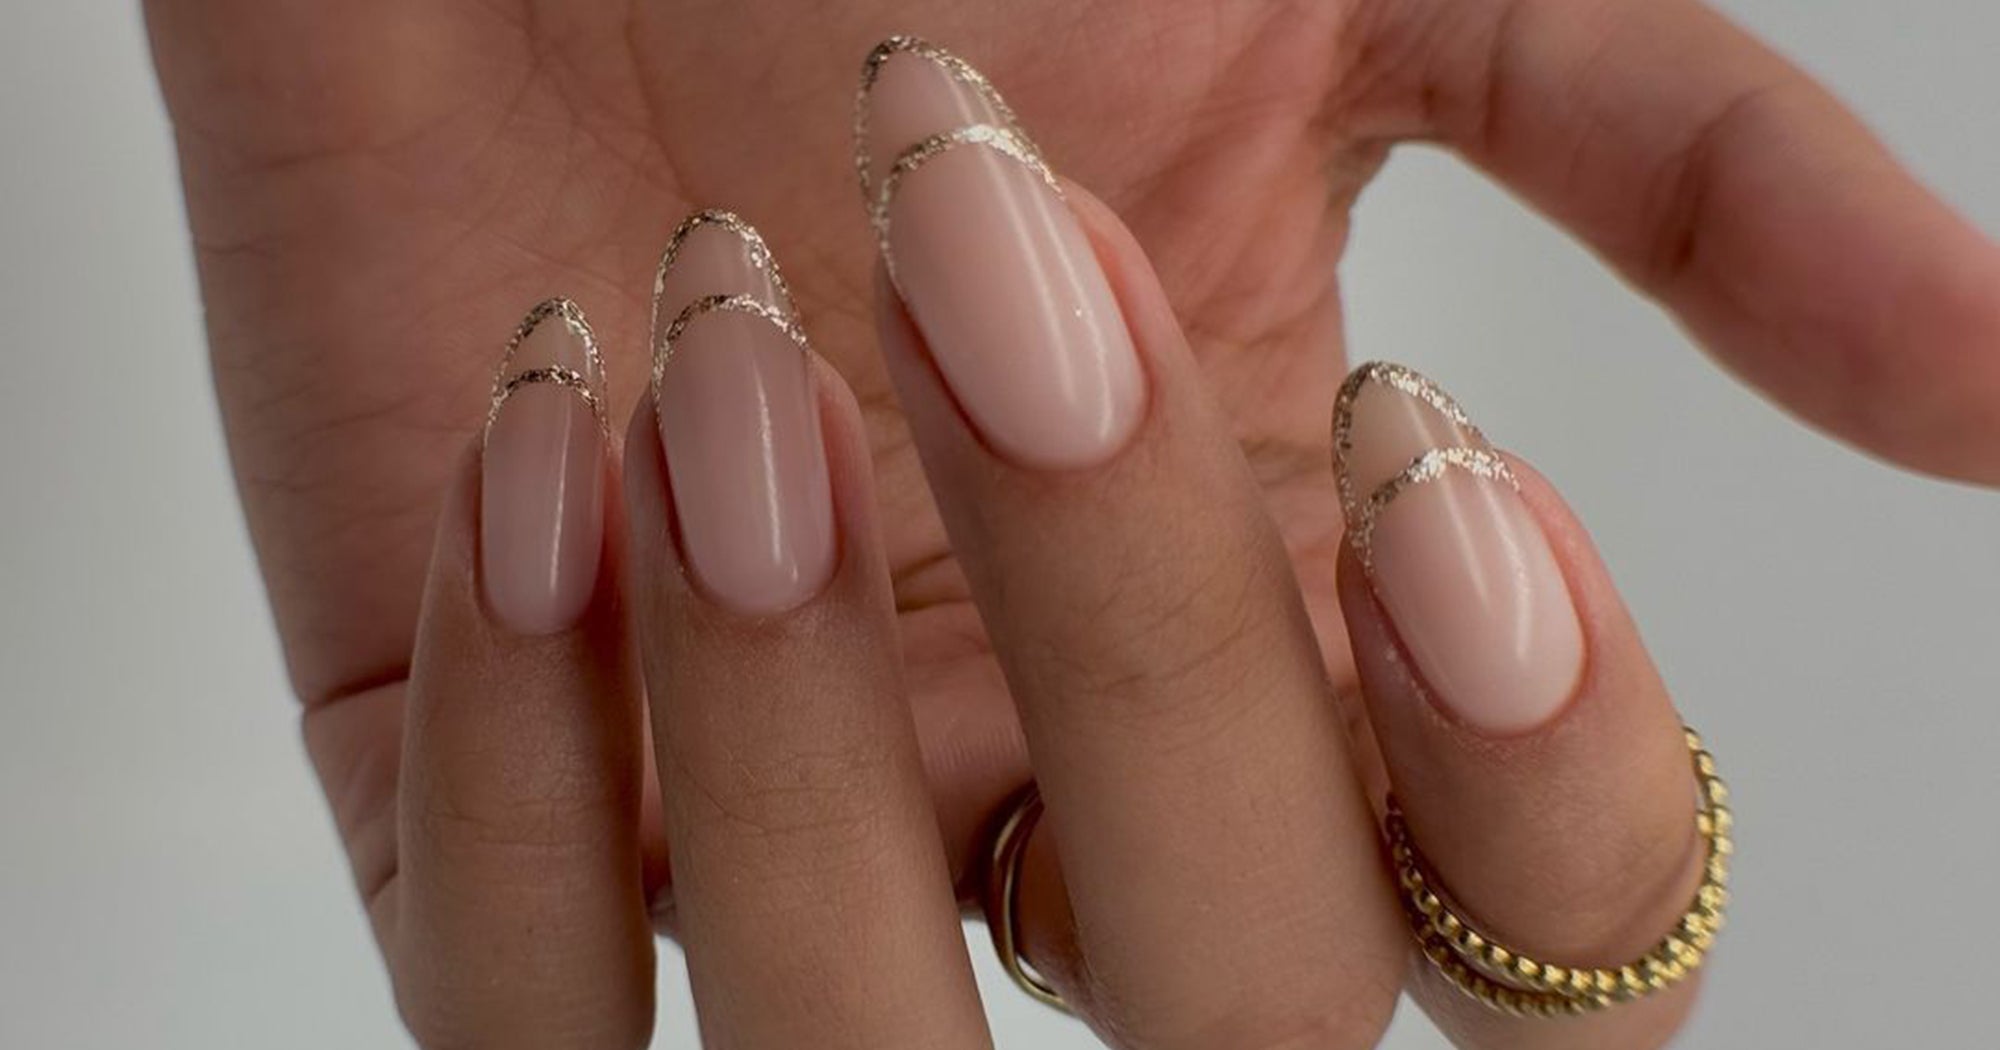 11 “Invisible” French Manicures Everyone’s Asking For